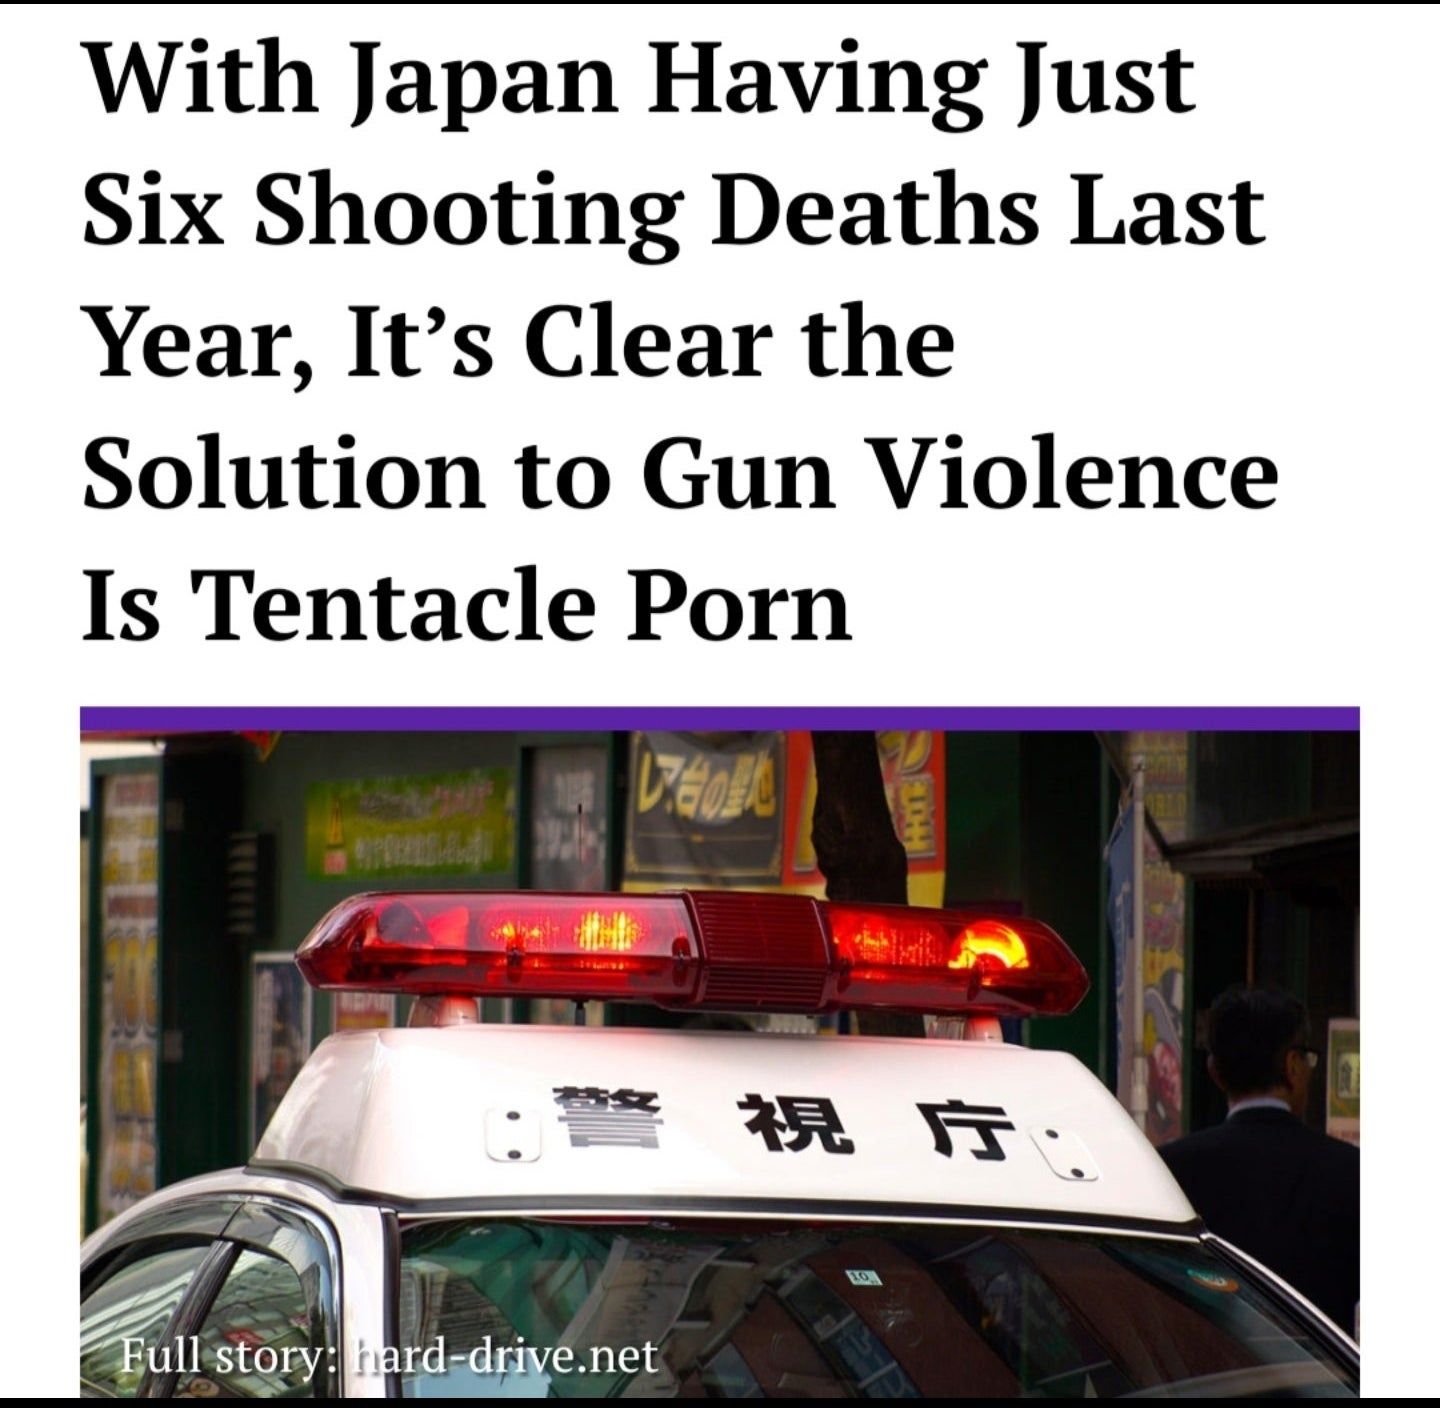 We need more tentacle porn